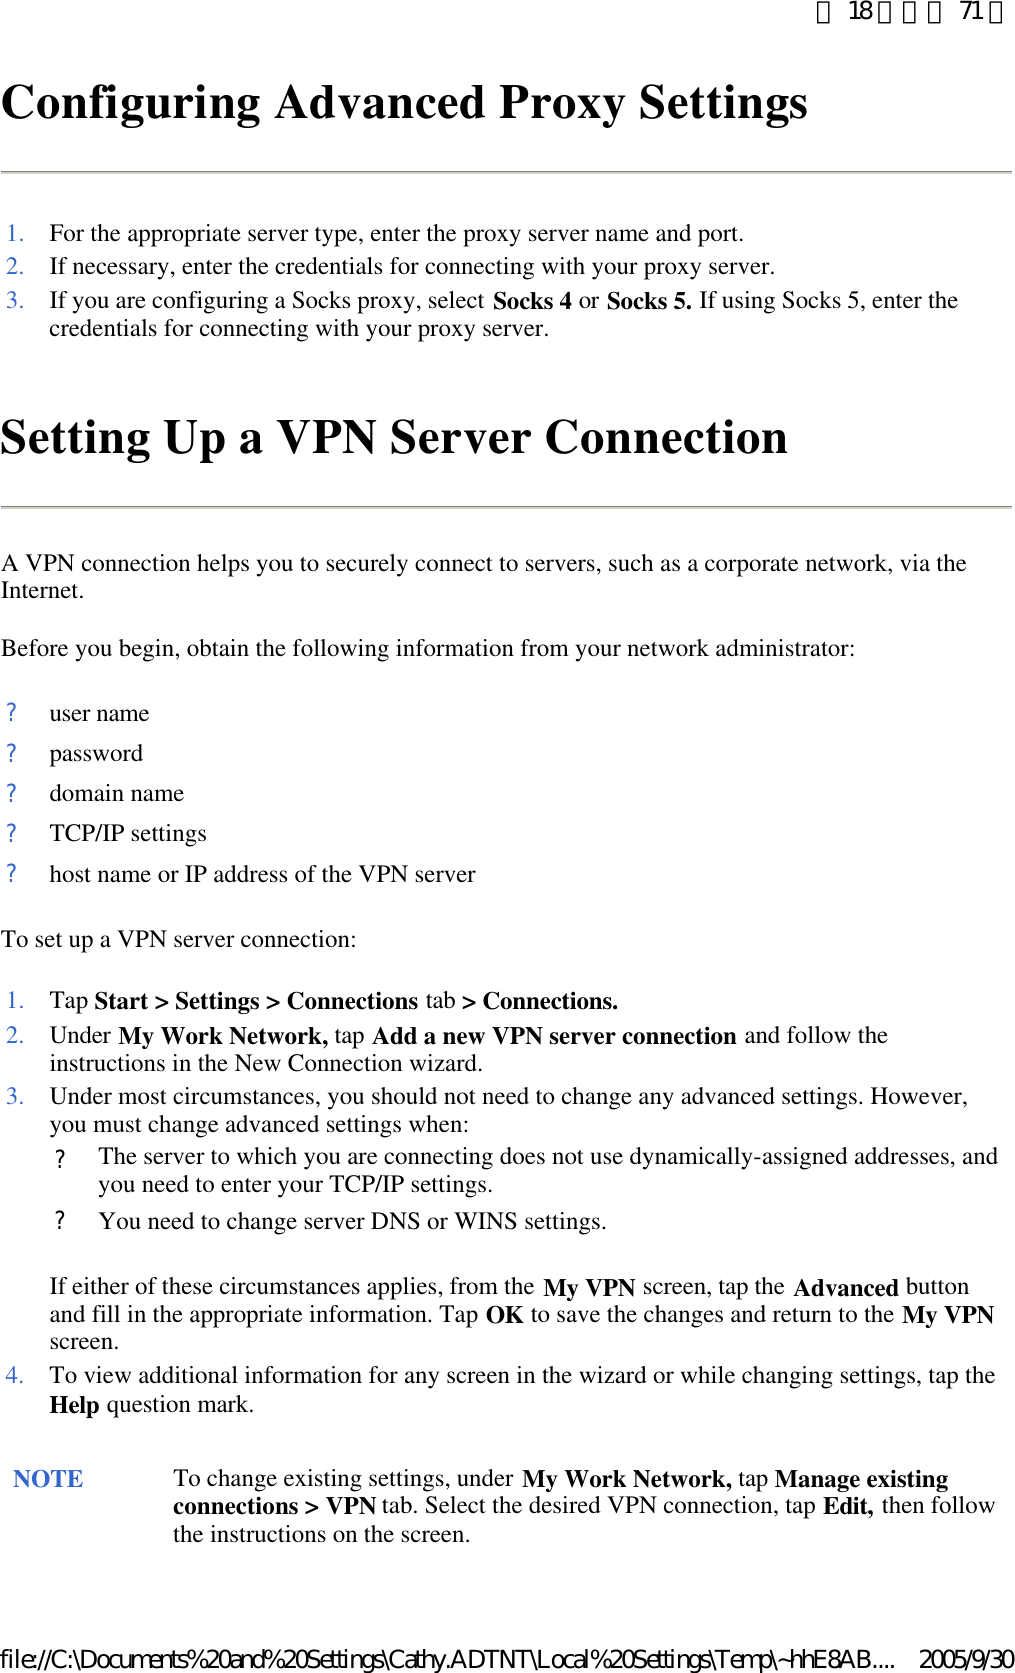 Configuring Advanced Proxy Settings  Setting Up a VPN Server Connection A VPN connection helps you to securely connect to servers, such as a corporate network, via the Internet. Before you begin, obtain the following information from your network administrator: To set up a VPN server connection: 1. For the appropriate server type, enter the proxy server name and port. 2. If necessary, enter the credentials for connecting with your proxy server.3. If you are configuring a Socks proxy, select Socks 4 or Socks 5. If using Socks 5, enter the credentials for connecting with your proxy server. ?user name?password?domain name?TCP/IP settings?host name or IP address of the VPN server1. Tap Start &gt; Settings &gt; Connections tab &gt; Connections.2. Under My Work Network, tap Add a new VPN server connection and follow the instructions in the New Connection wizard. 3. Under most circumstances, you should not need to change any advanced settings. However, you must change advanced settings when: If either of these circumstances applies, from the My VPN screen, tap the Advanced button and fill in the appropriate information. Tap OK to save the changes and return to the My VPN screen.  ?The server to which you are connecting does not use dynamically-assigned addresses, and you need to enter your TCP/IP settings.?You need to change server DNS or WINS settings.4. To view additional information for any screen in the wizard or while changing settings, tap the Help question mark. NOTE To change existing settings, under My Work Network, tap Manage existing connections &gt; VPN tab. Select the desired VPN connection, tap Edit, then follow the instructions on the screen.  第 18 頁，共 71 頁2005/9/30file://C:\Documents%20and%20Settings\Cathy.ADTNT\Local%20Settings\Temp\~hhE8AB....